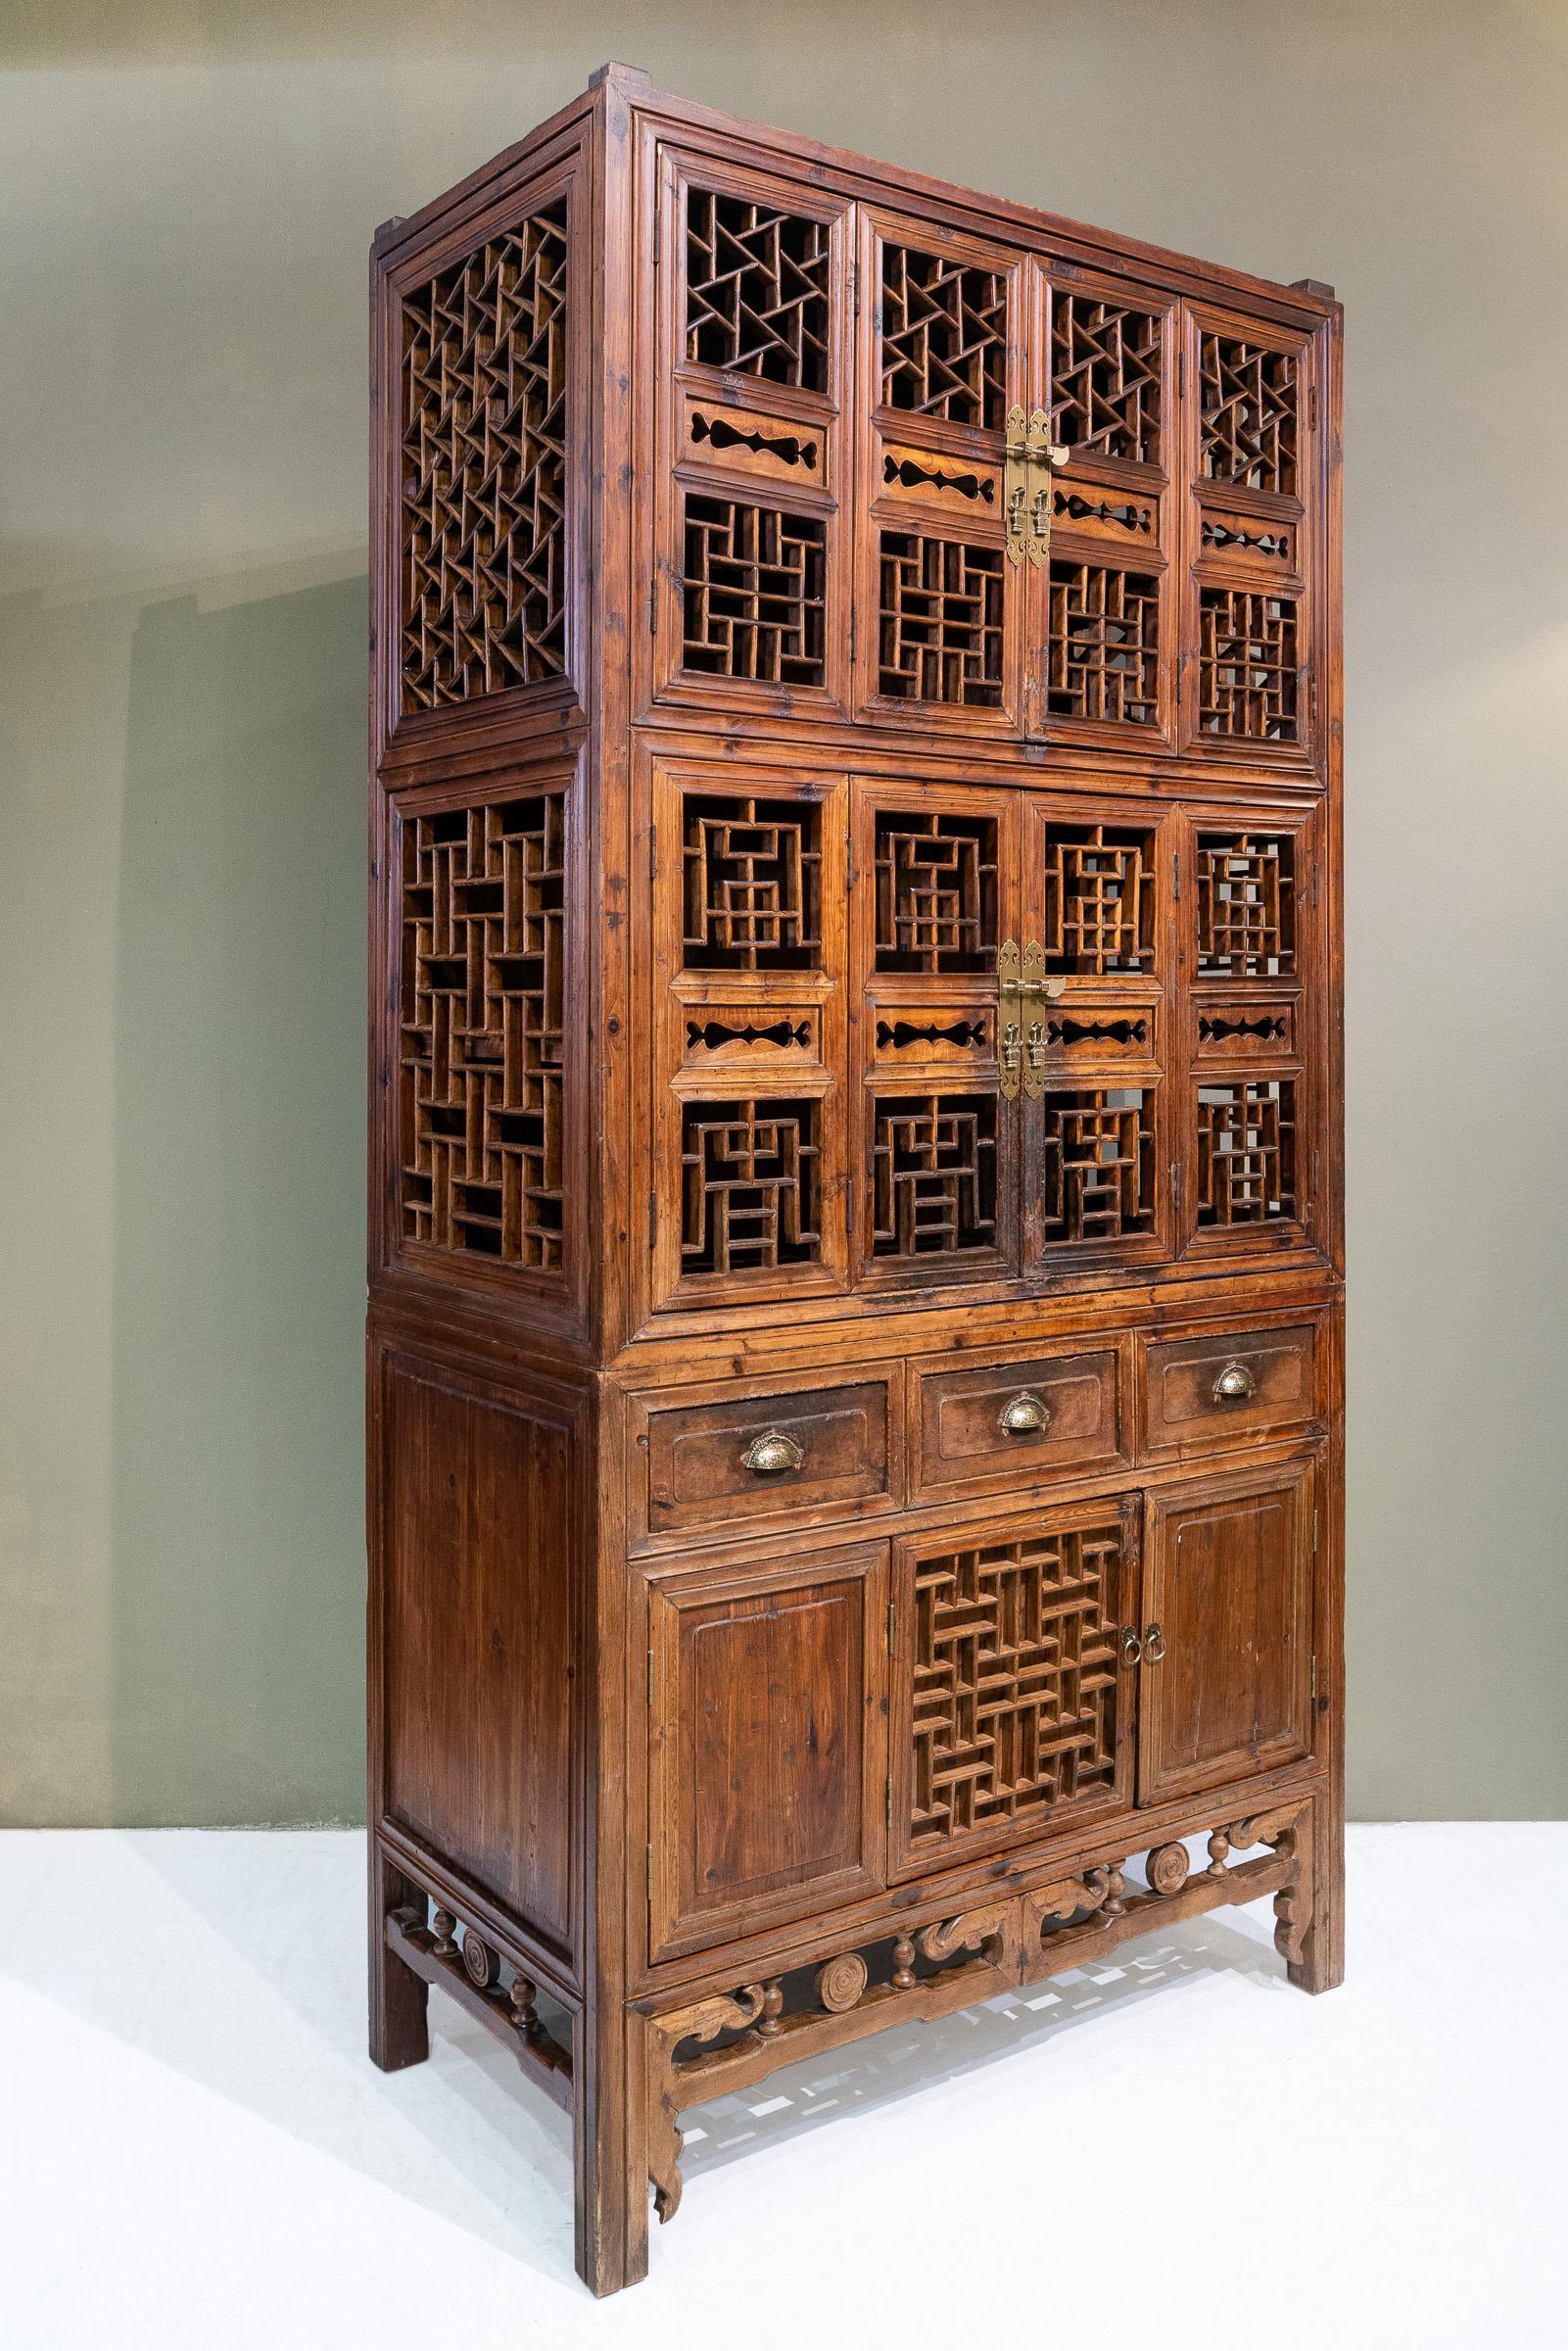 An early 20th century tall kitchen cabinet from Zhejiang province, China. The most interesting part about this cabinet is there are many different lattice patterns on it, right at the top in front and on both sides is the 